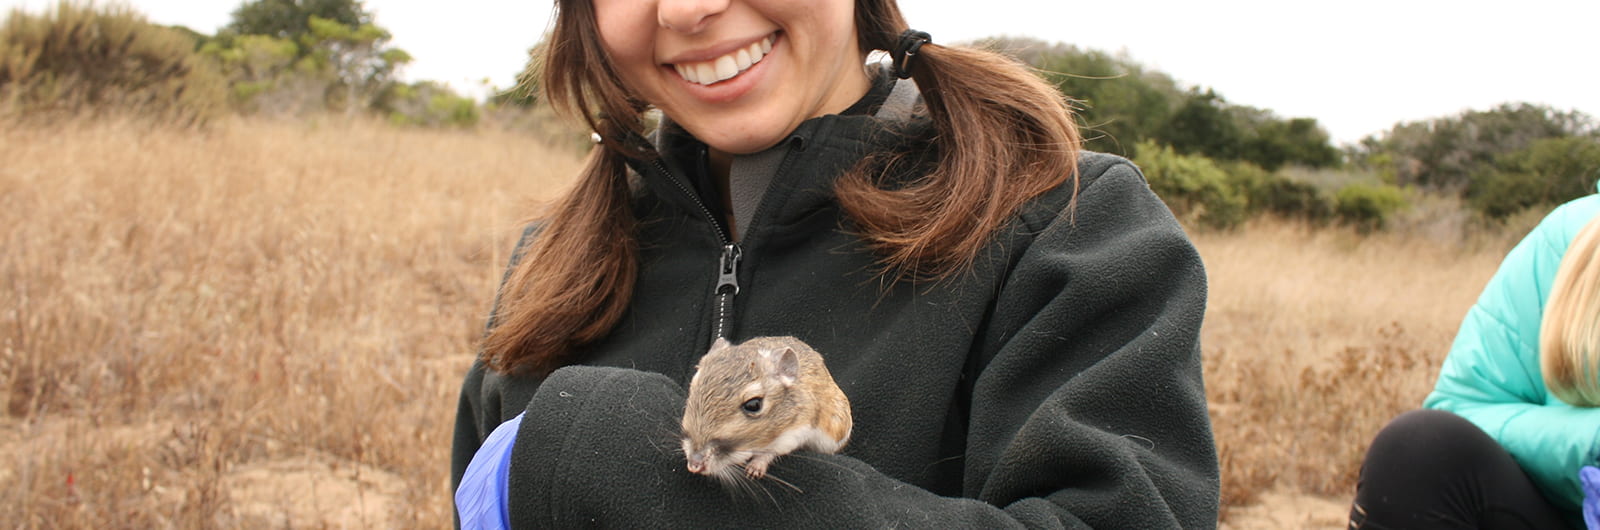 Small Mammal Undergraduate Research in the Forest (SMURF)